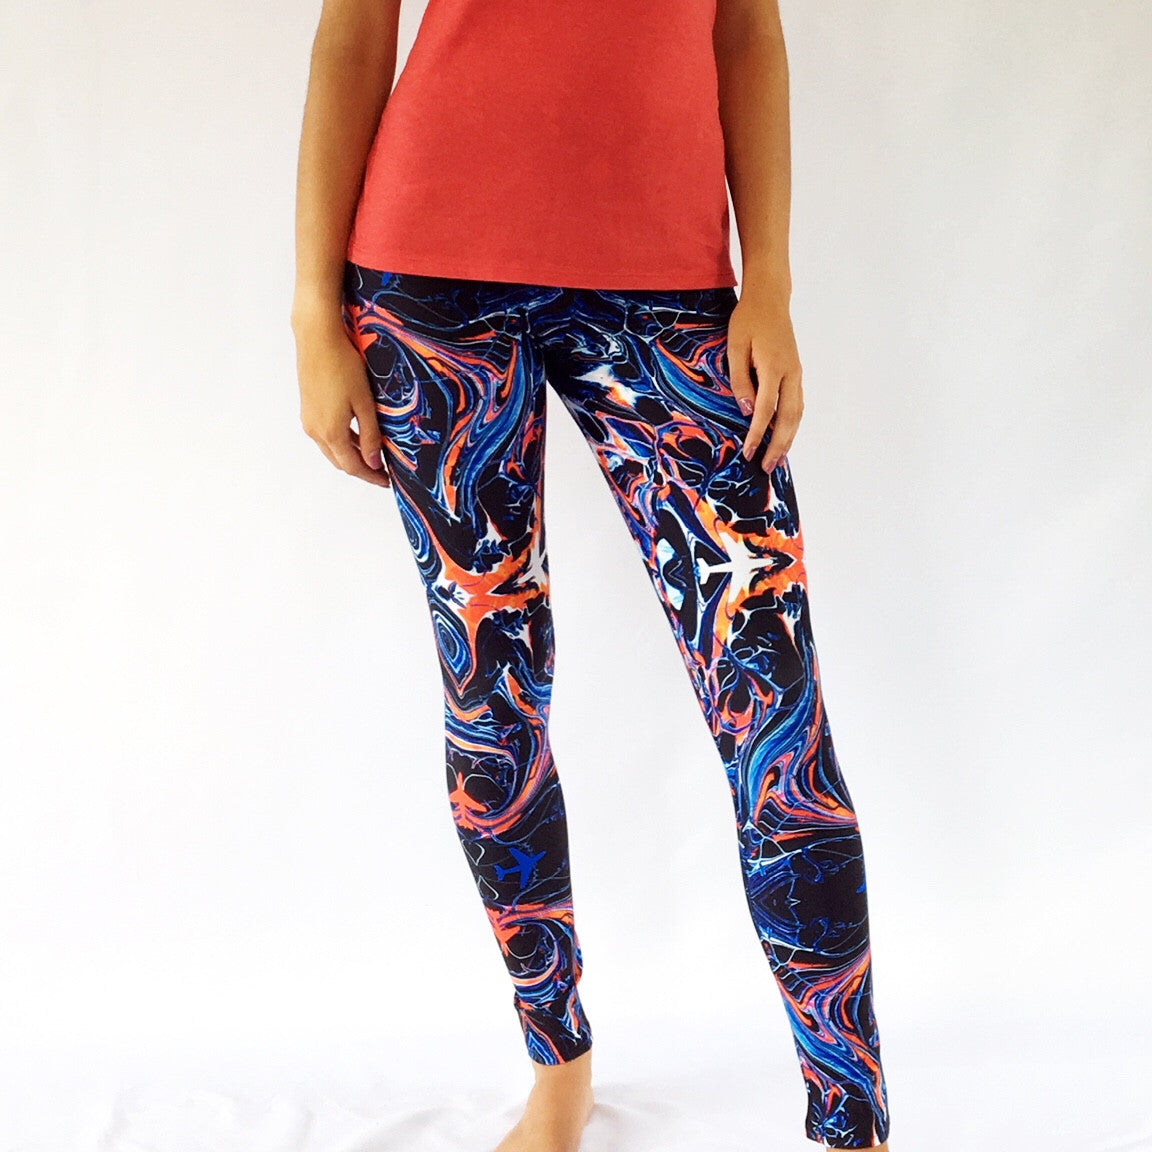 One Plane Jane Womens leggings. Mystic pattern - black with red, orange, and blue kaleidoscope with strategically placed airplanes. Great for flying, travel, or just for fun. 